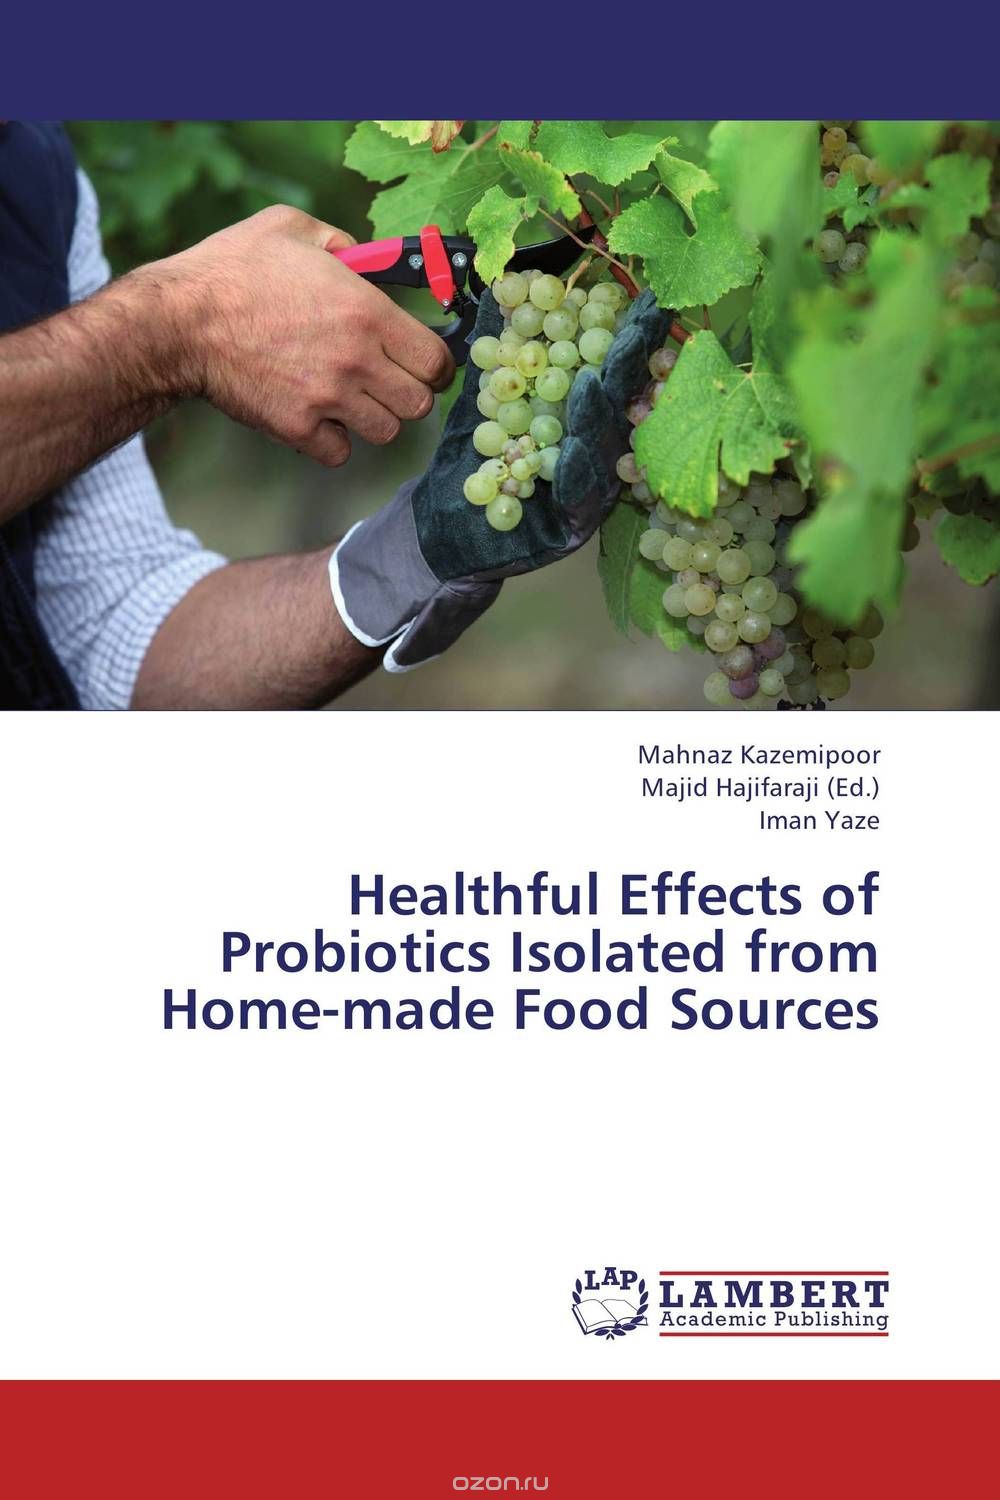 Healthful Effects of Probiotics Isolated from Home-made Food Sources